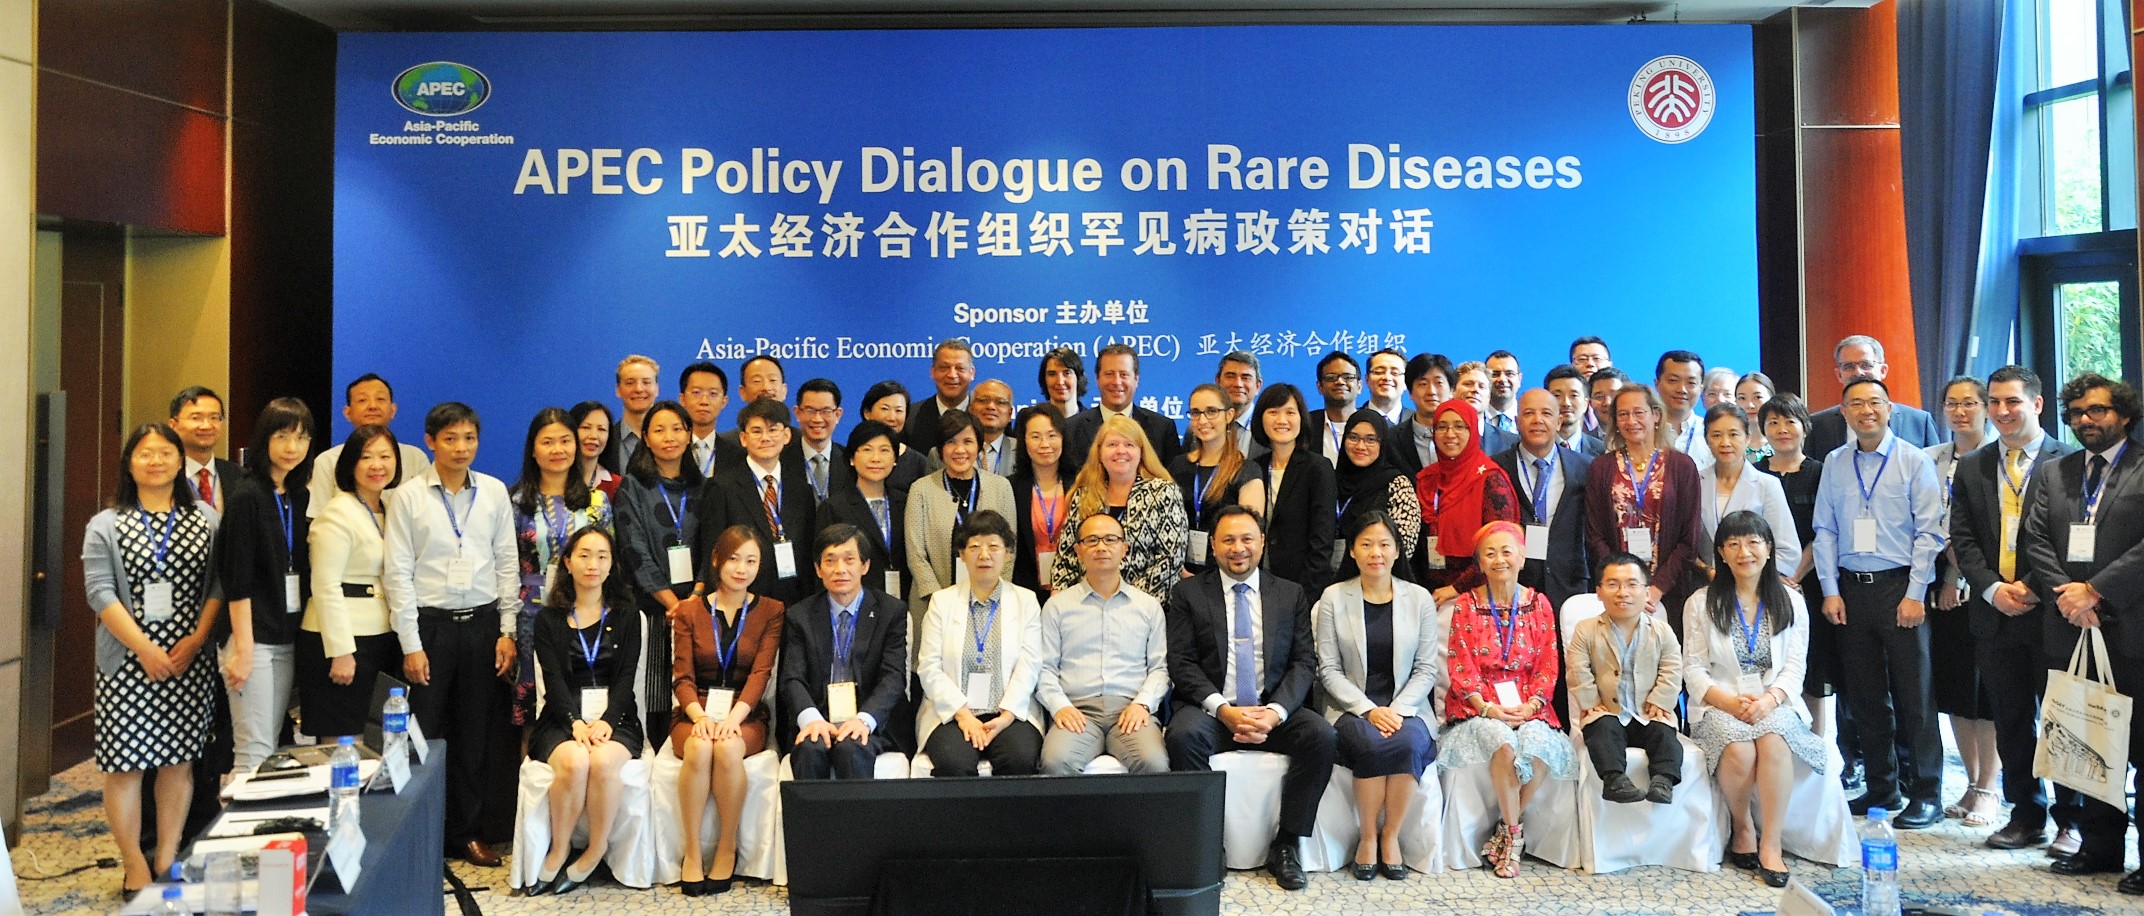 1st APEC Policy Dialogue on Rare Diseases, Beijing, China, June 2018